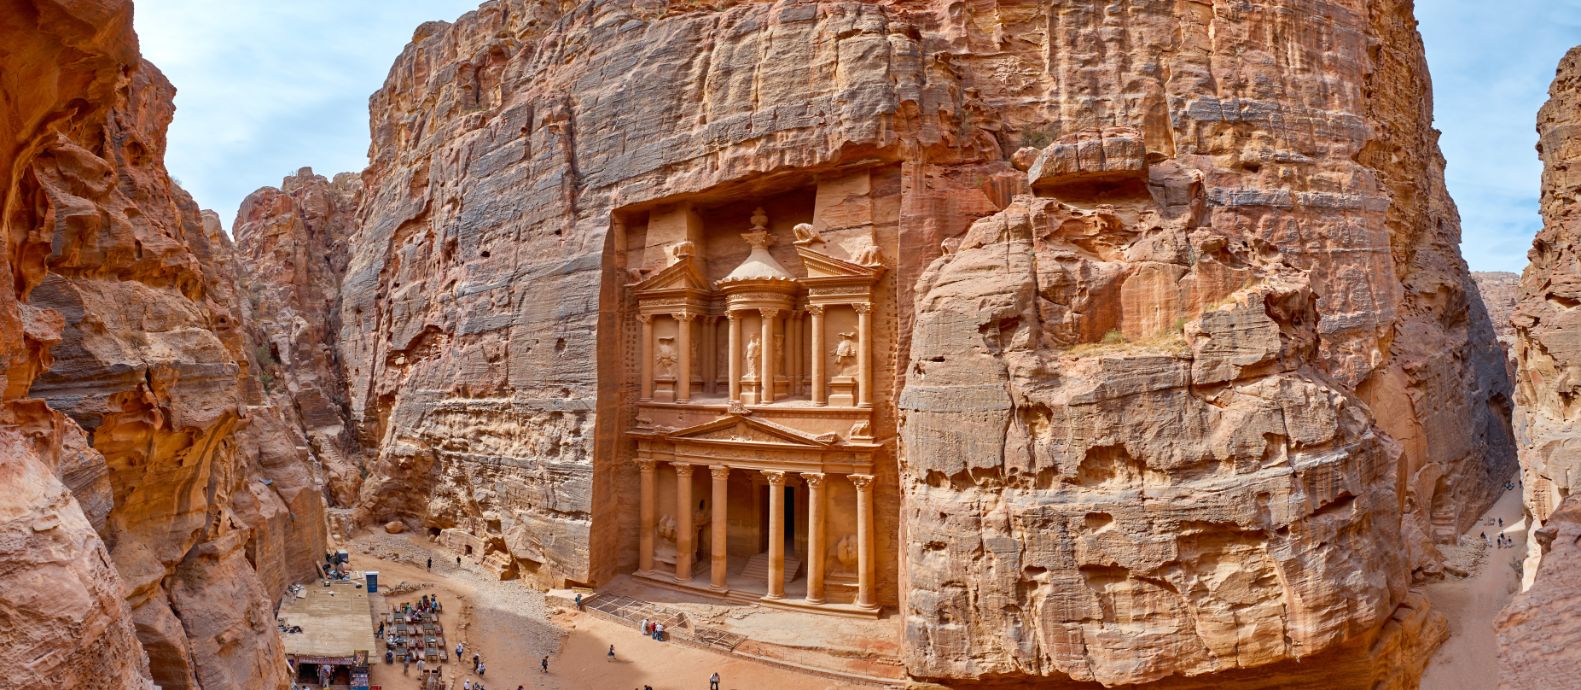 Petra and Wadi Rum 3 Day Tour from Jerusalem